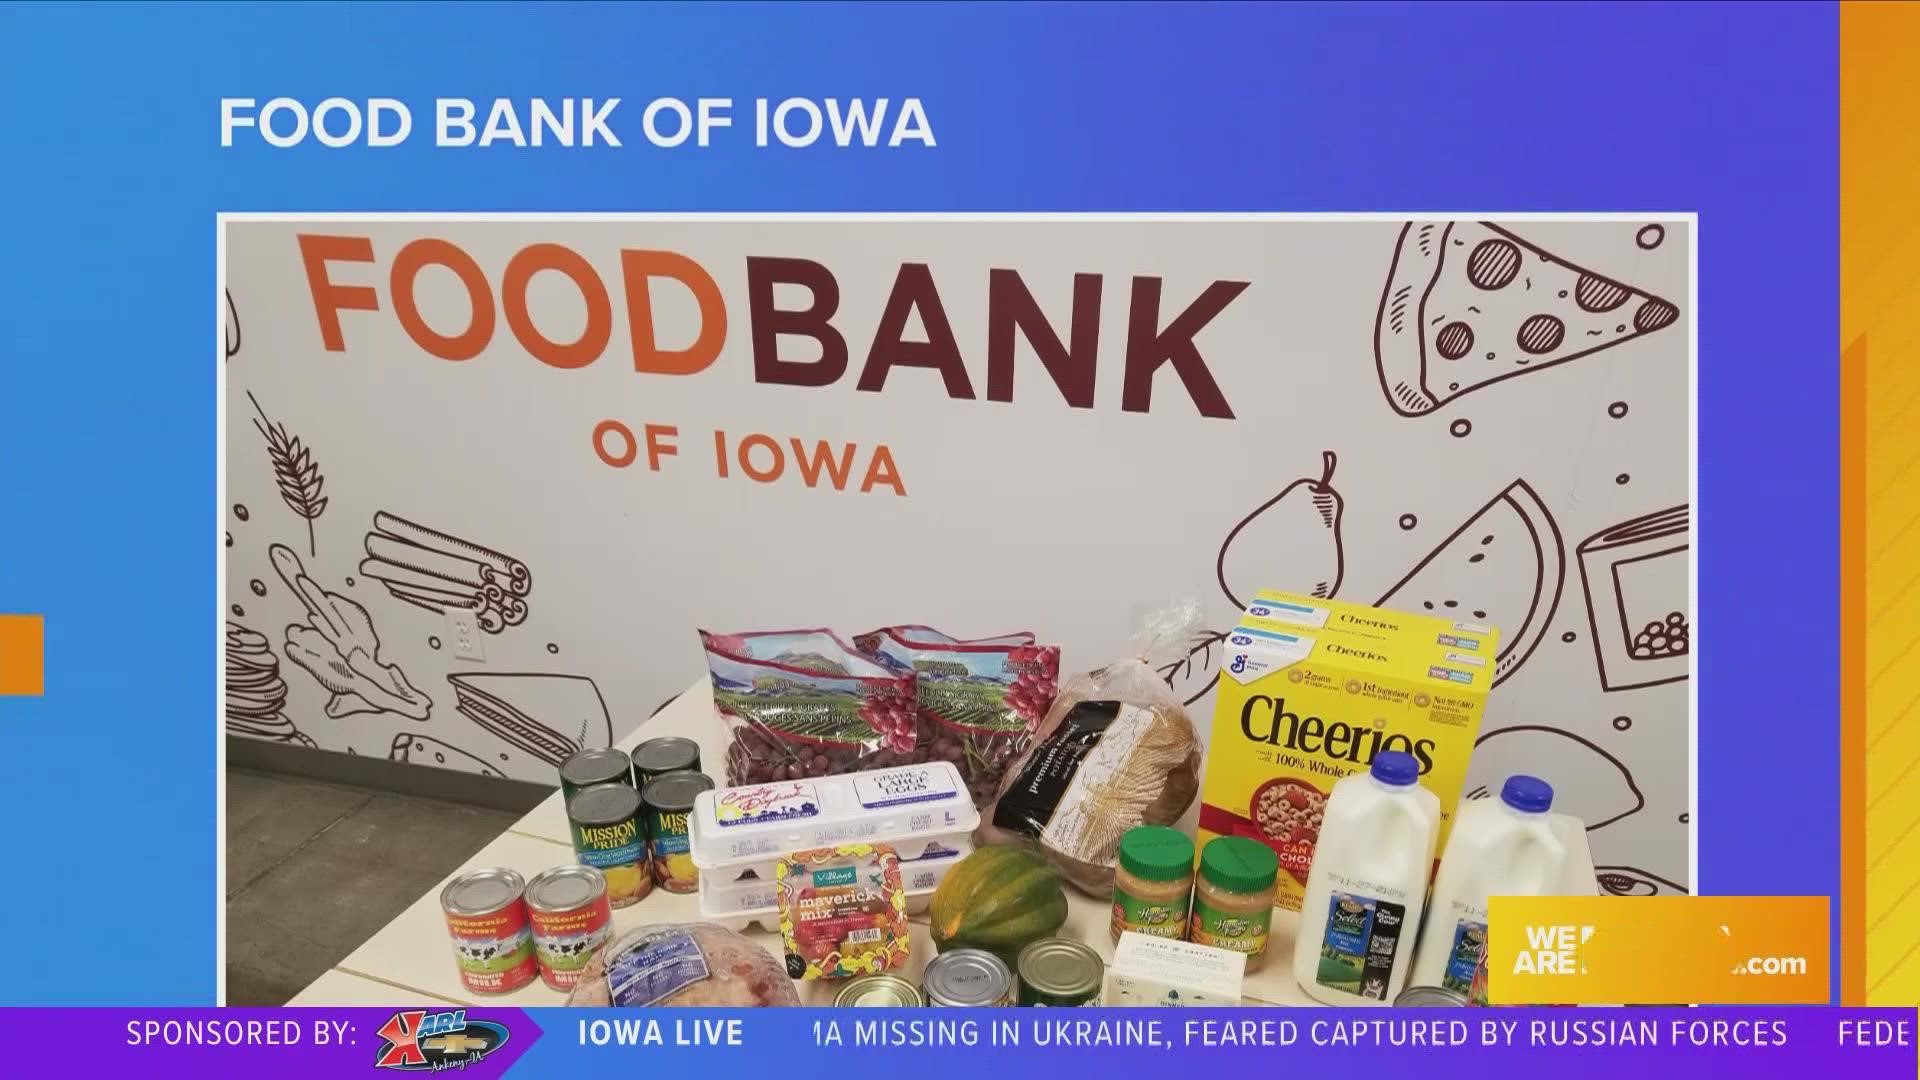 Annette Hacker, Food Bank of Iowa, explains how summertime can result in an increase in Childhood Hunger & the Food Bank of Iowa helps supply pantries to meet needs.